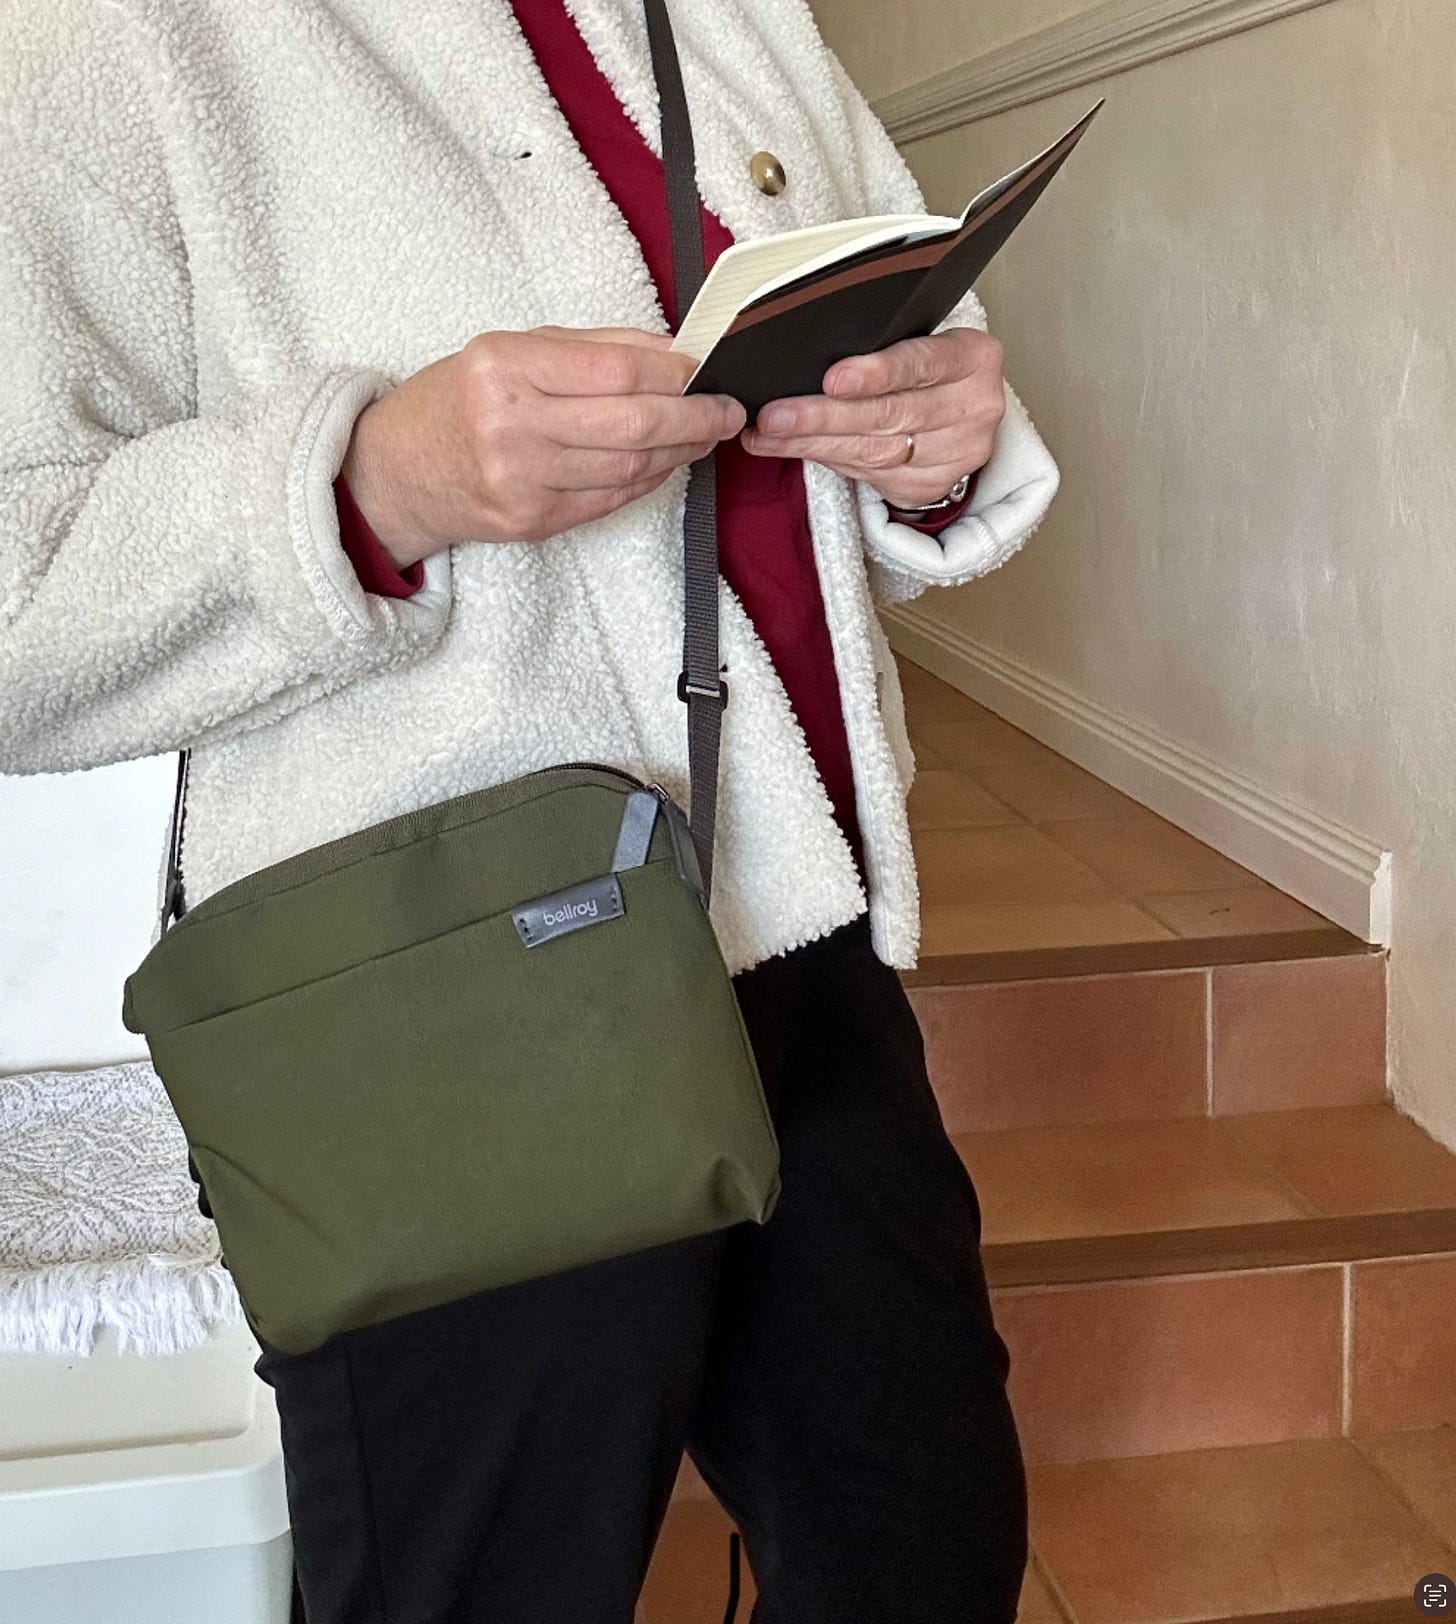 Torso of a person wearing black trousers and a fluffy cream jacket, standing in front of some stairs. They are wearing a khaki-coloured, compact cross body bag, and holding a opened, pocket sized black notebook.